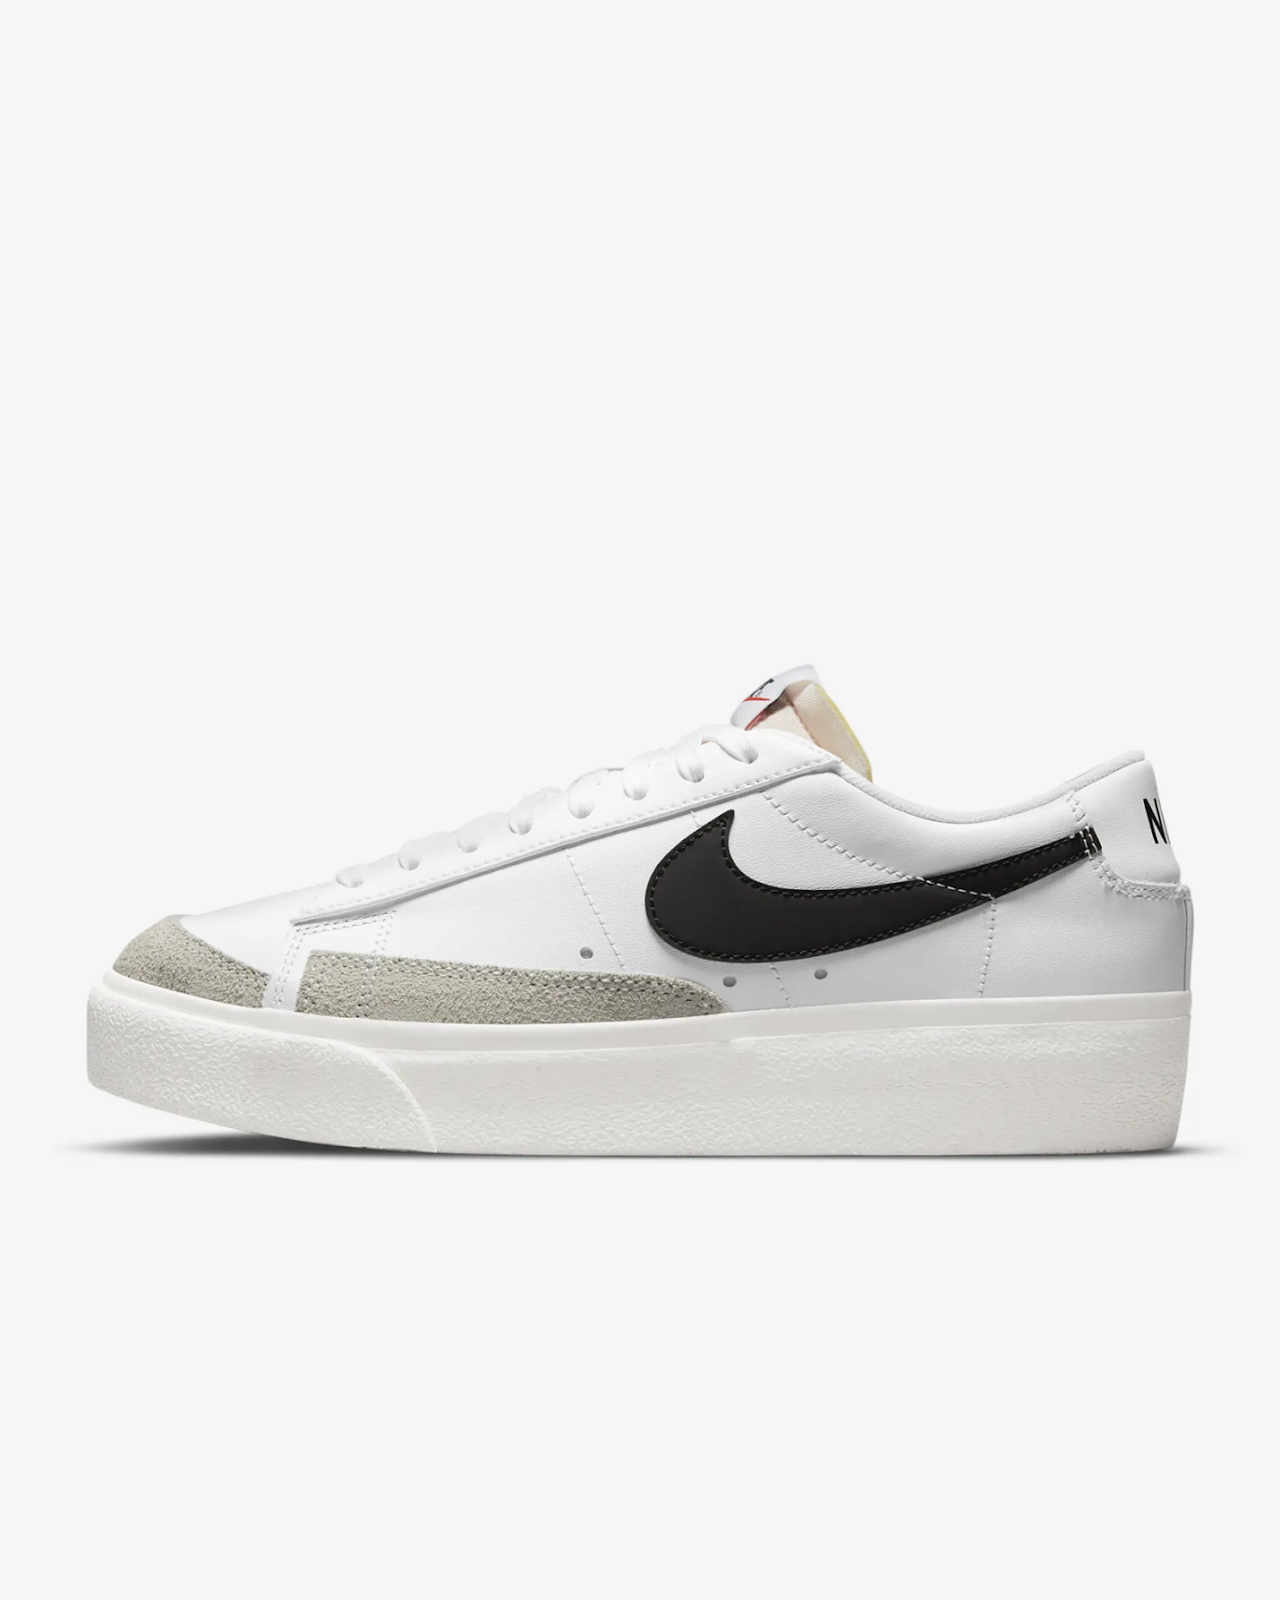 Nike Blazer Low Platform Sneakers: A classic sneaker with a platform sole for added height and style.
